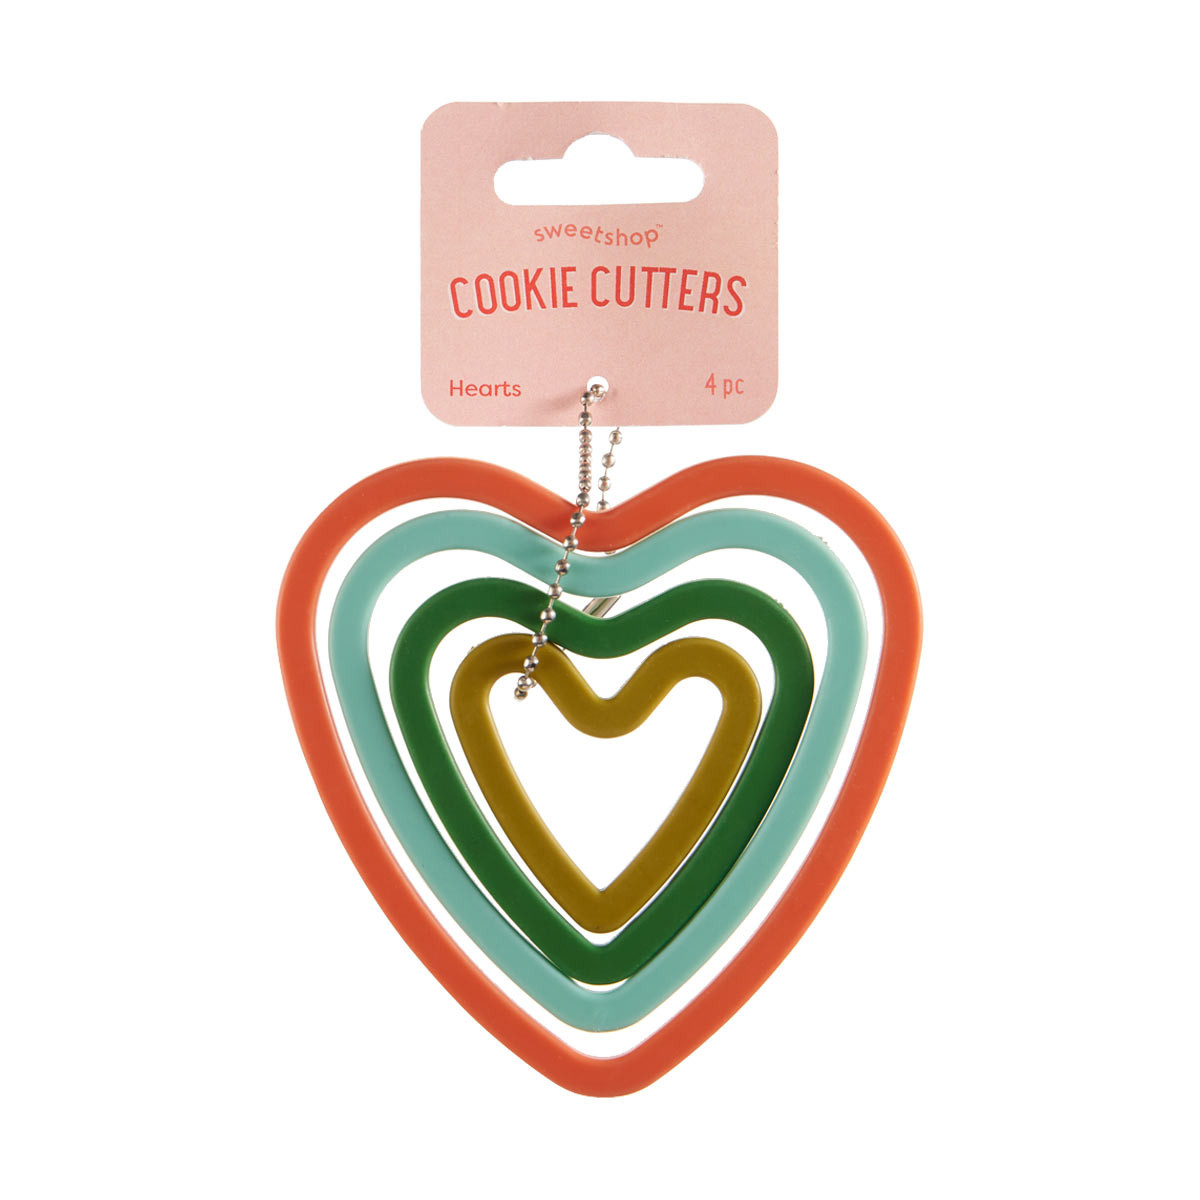 Sweetshop Cookie Cutters, Hearts, 4 Pack